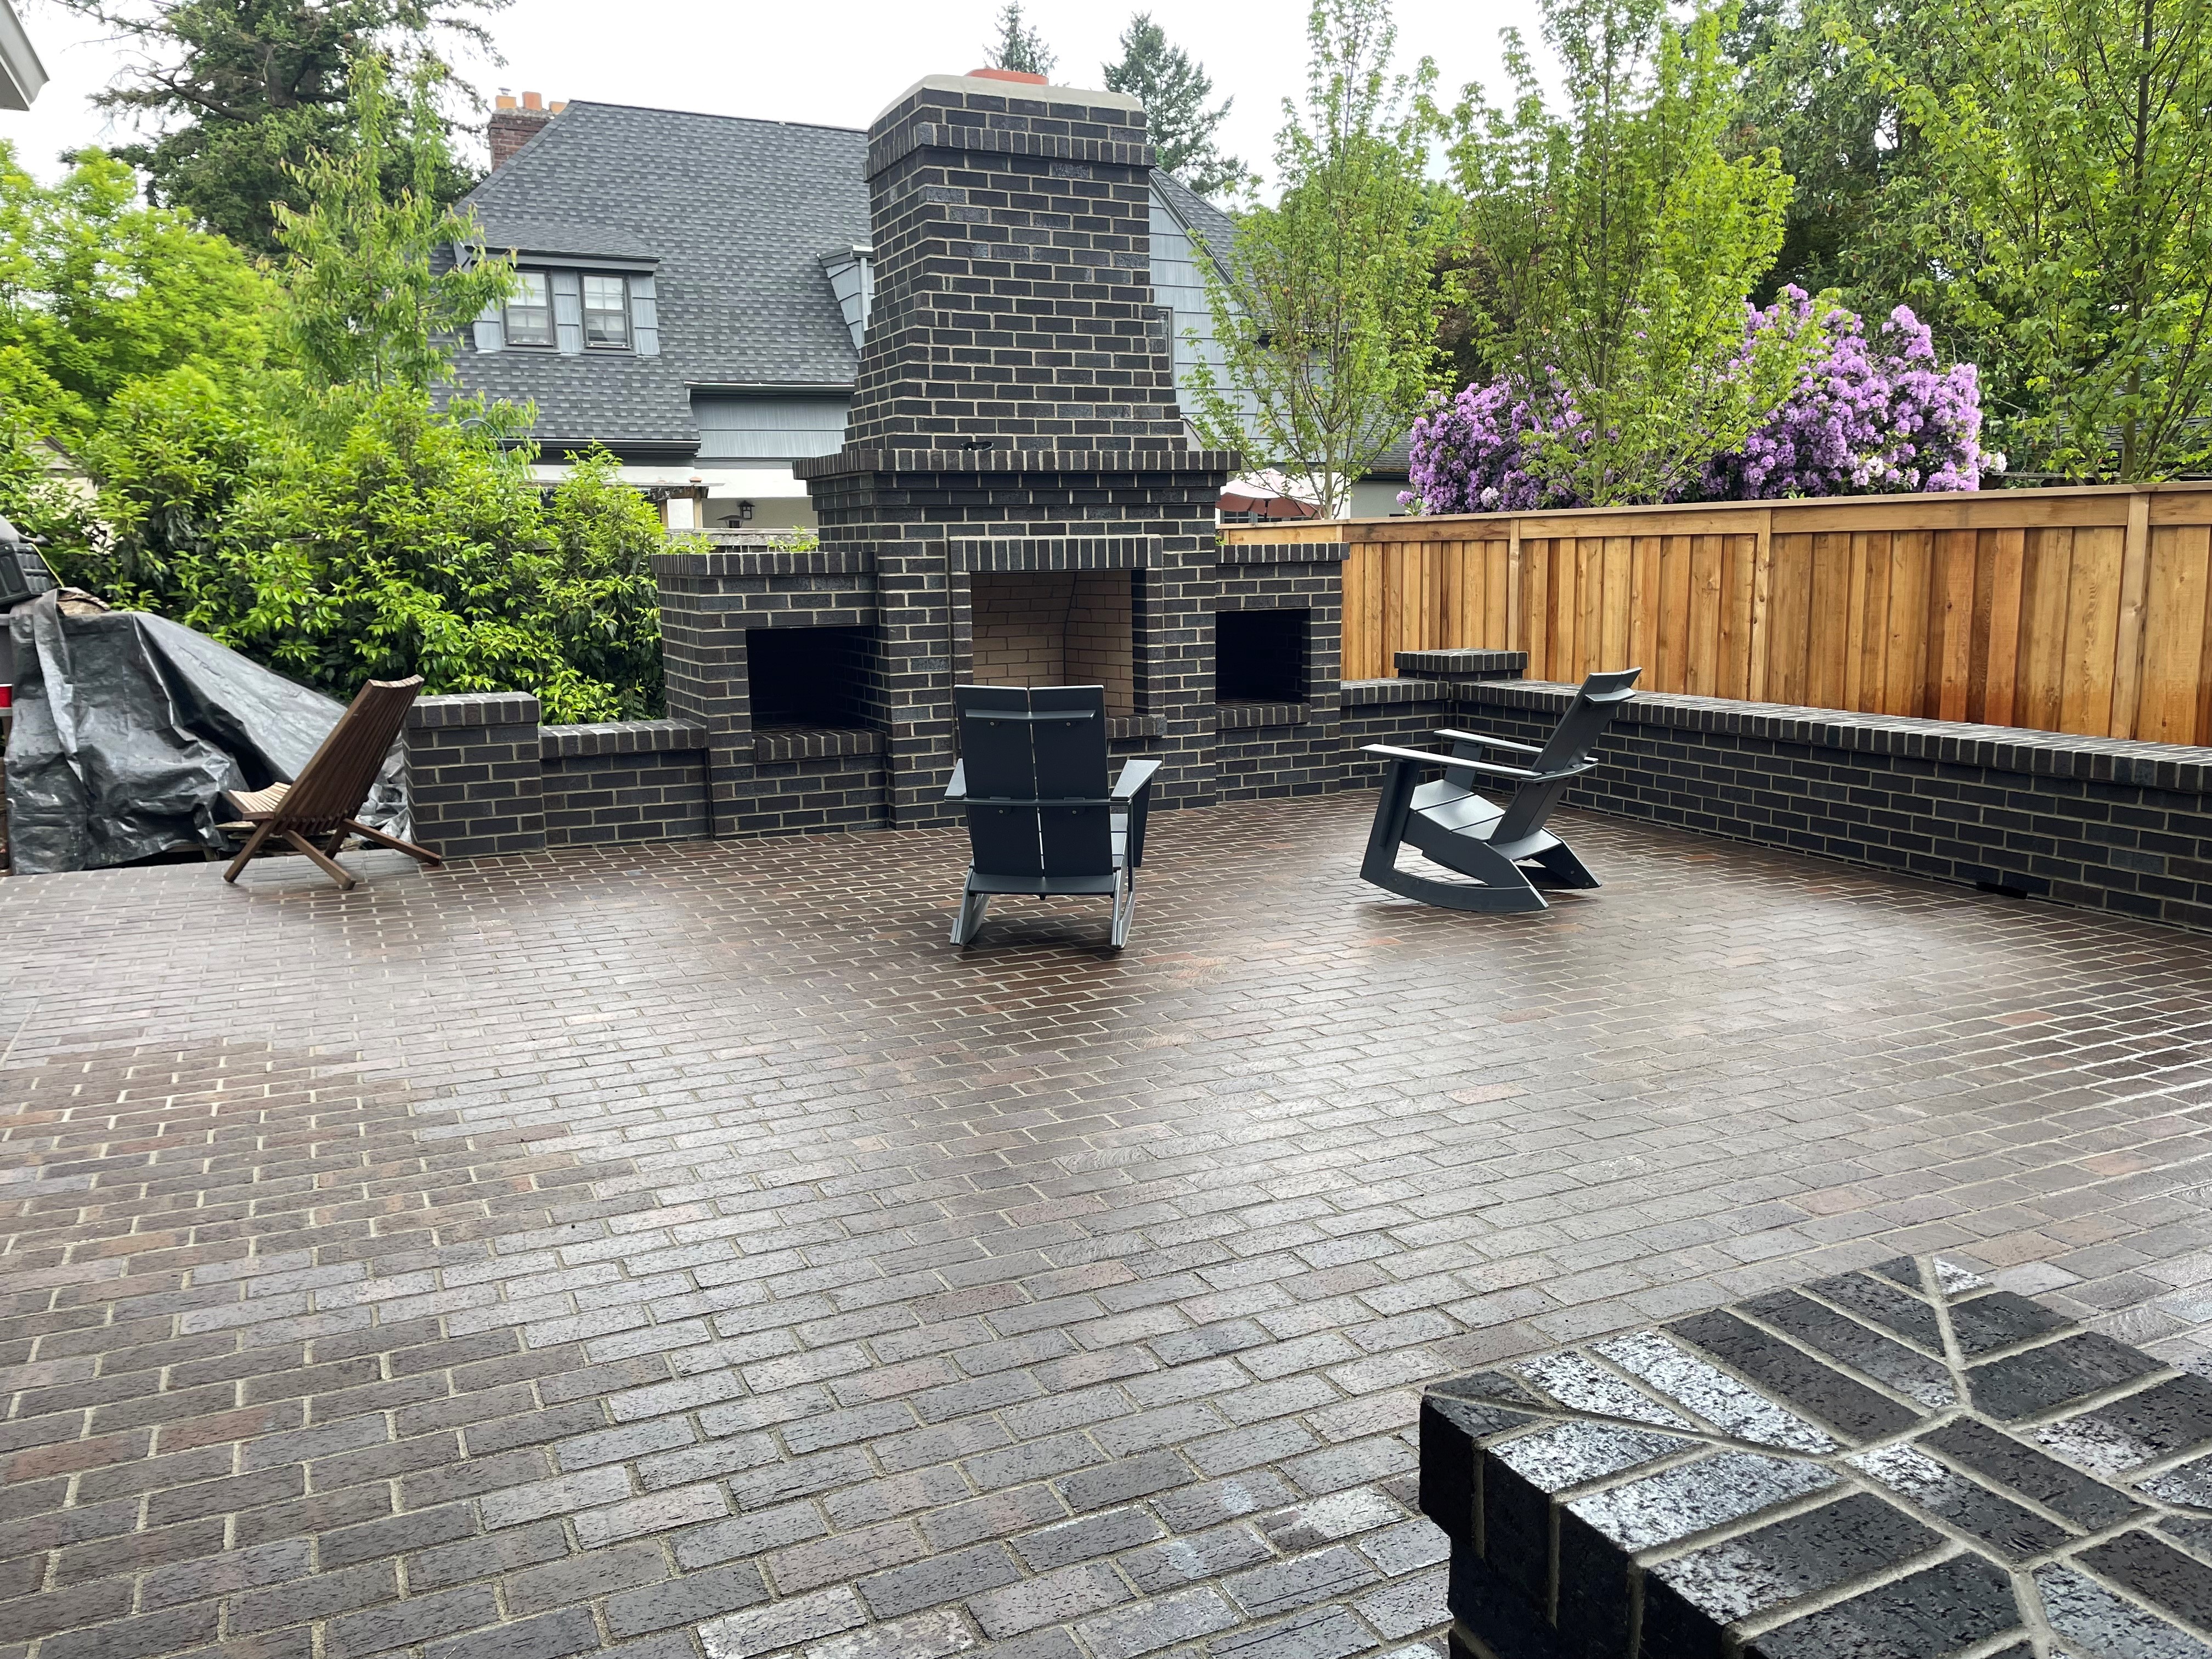 Top Quality Brick Masonry Patio and Outdoor Brick Fireplace in Portland, Oregon